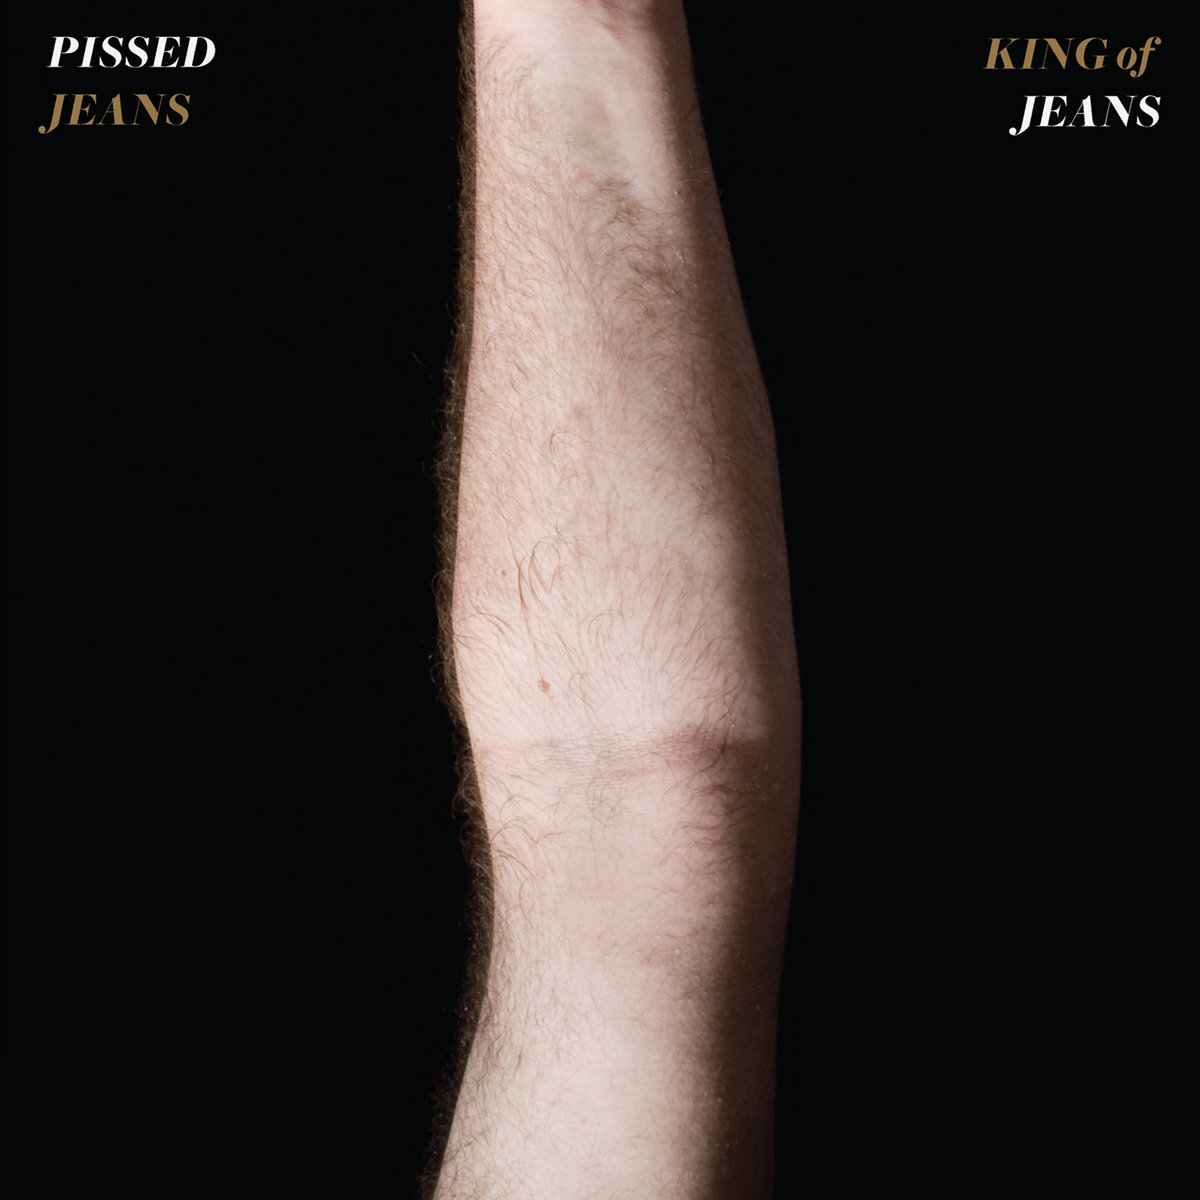 King of Jeans | Pissed Jeans